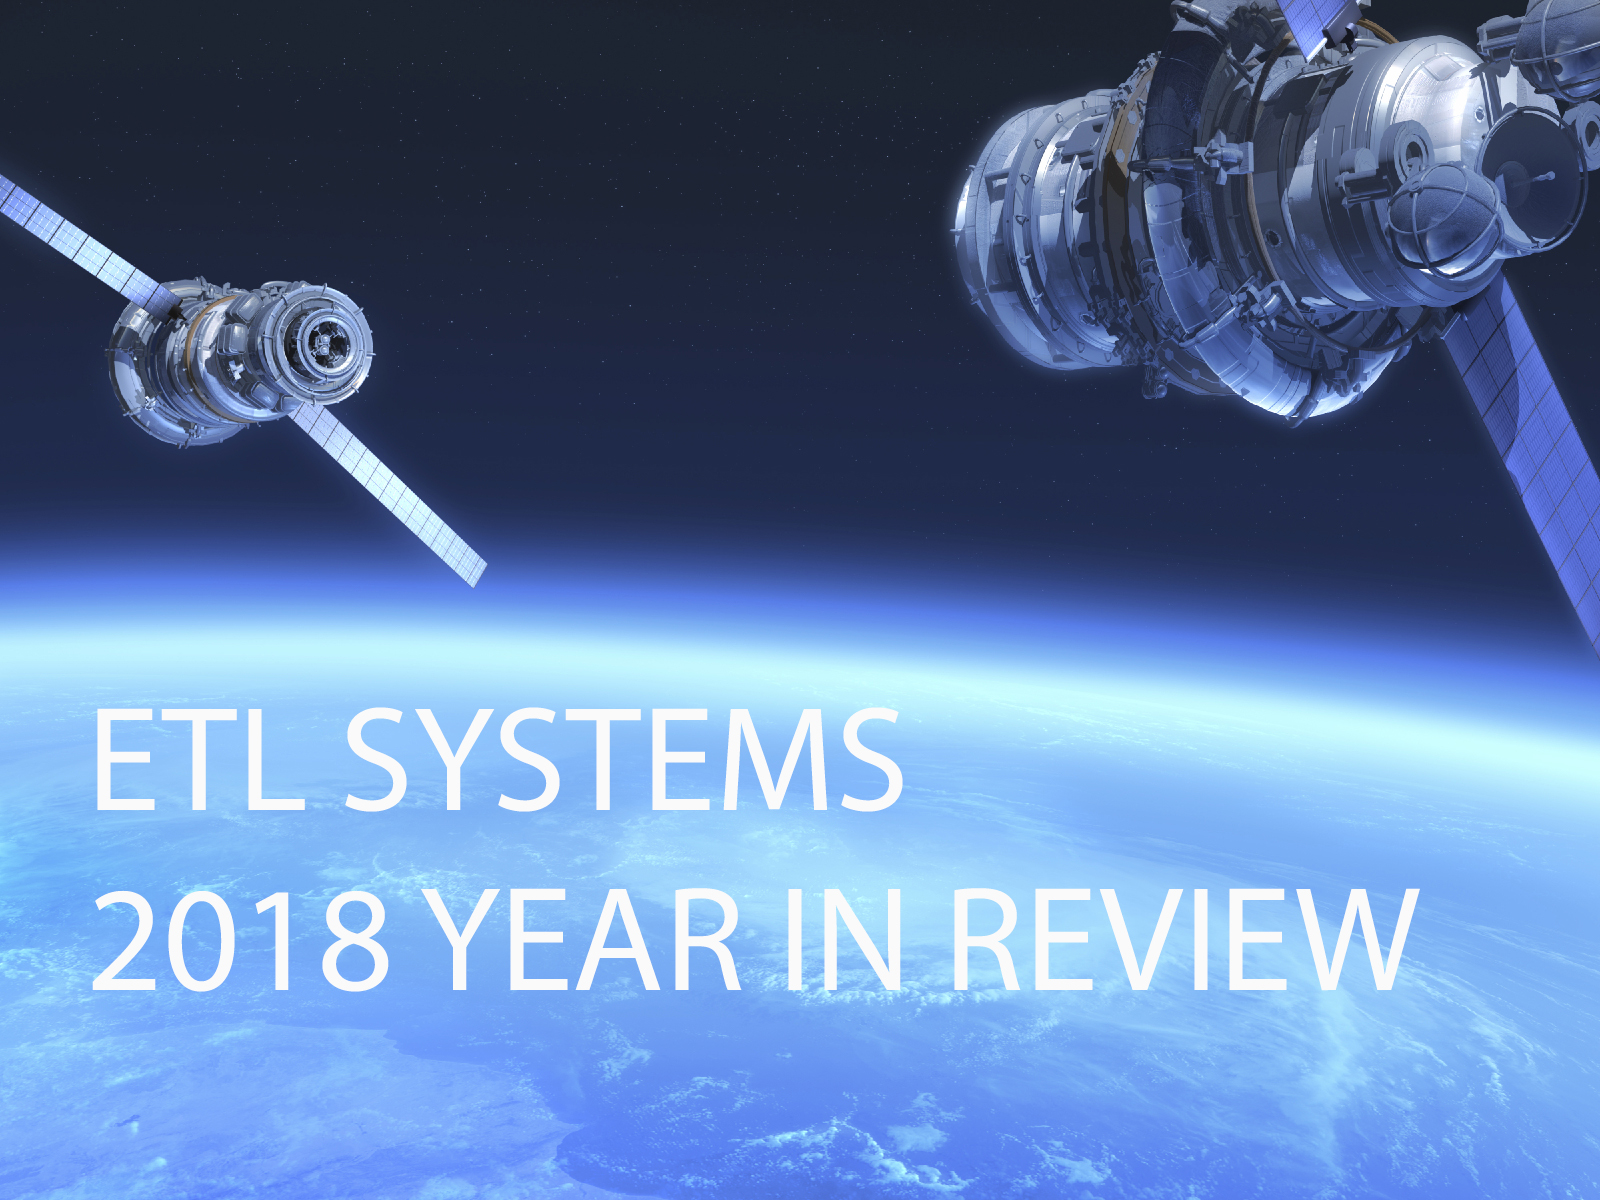 ETL SYSTEMS YEAR IN REVIEW 2018